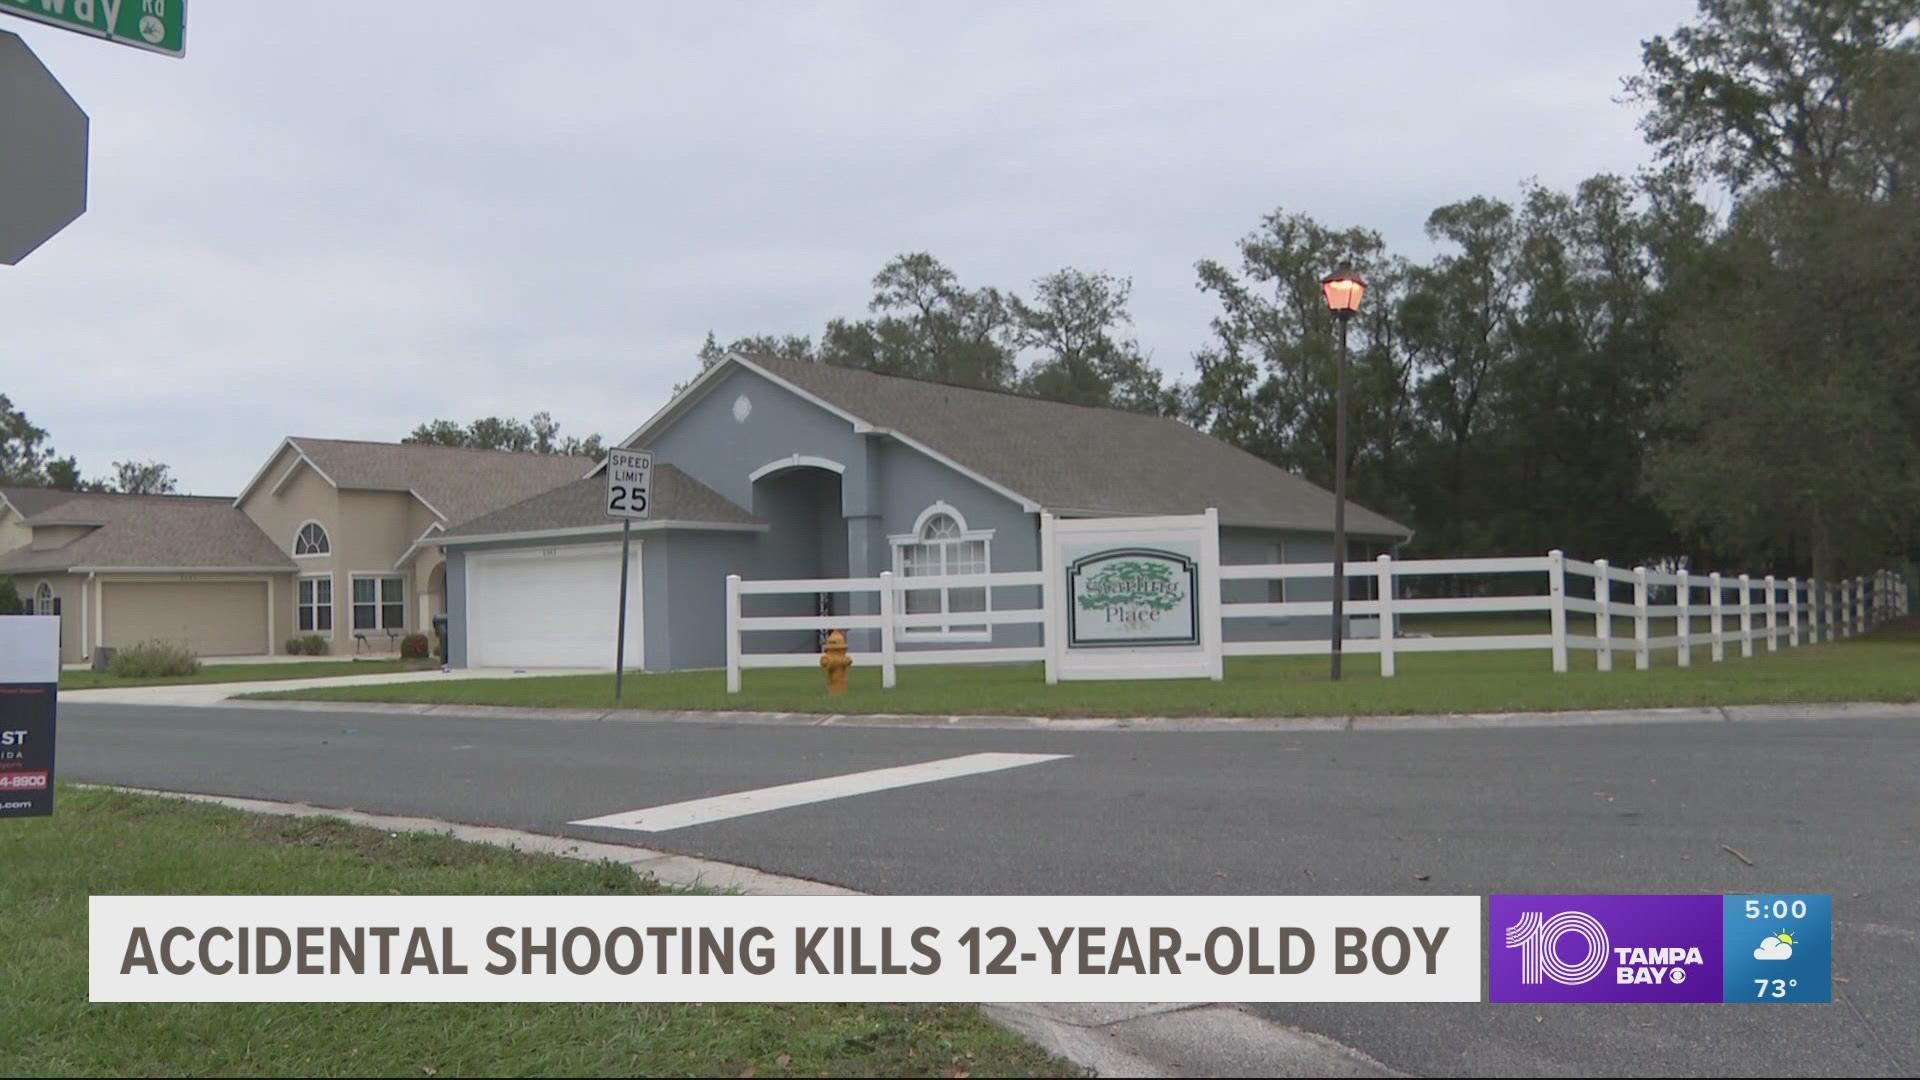 The child was taken to a hospital in Tampa following the shooting.